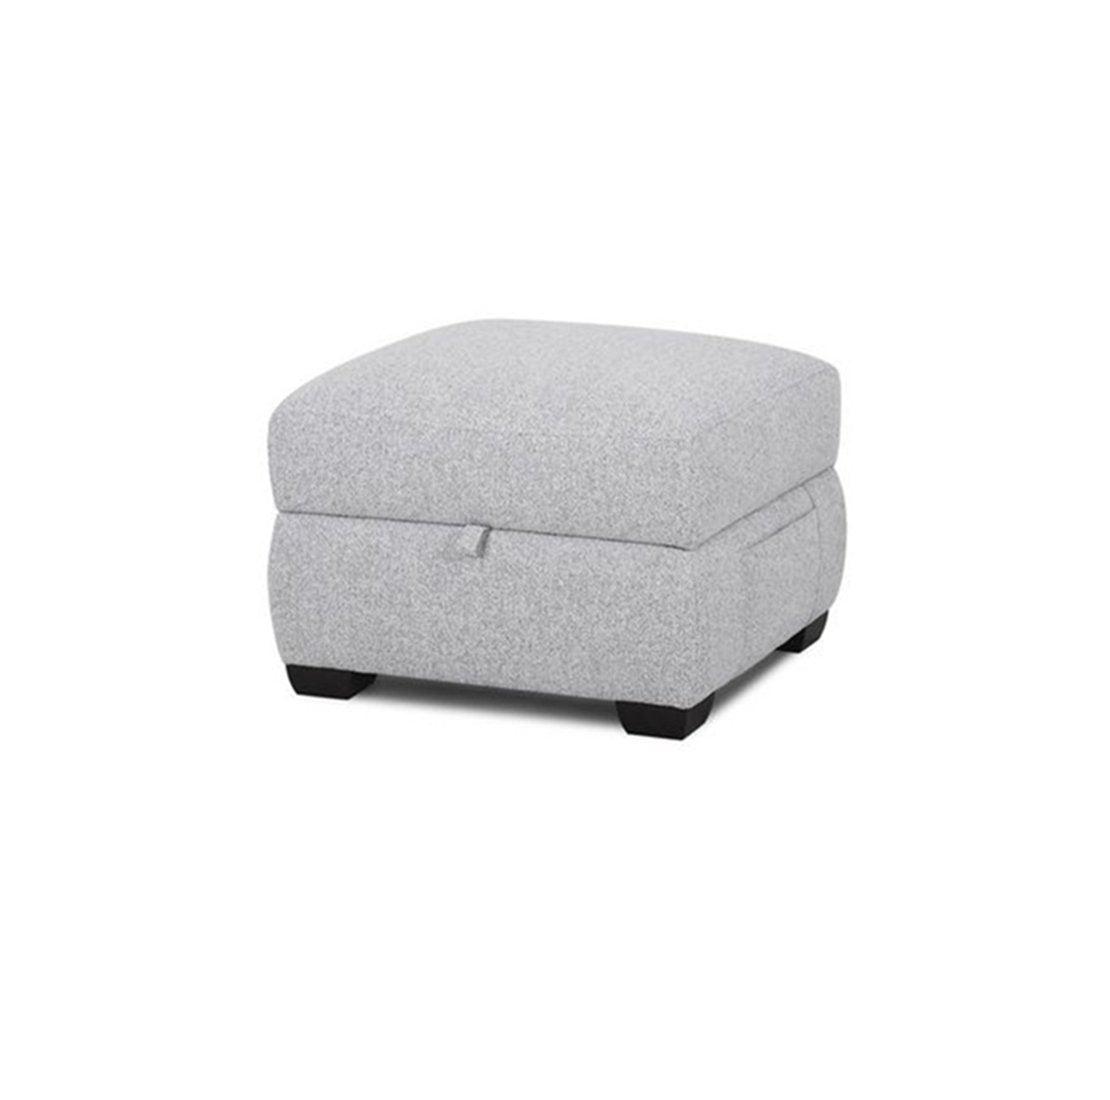 Lancer Square Shape Fabric Ottoman Pouffe Puffy for Foot Rest Home